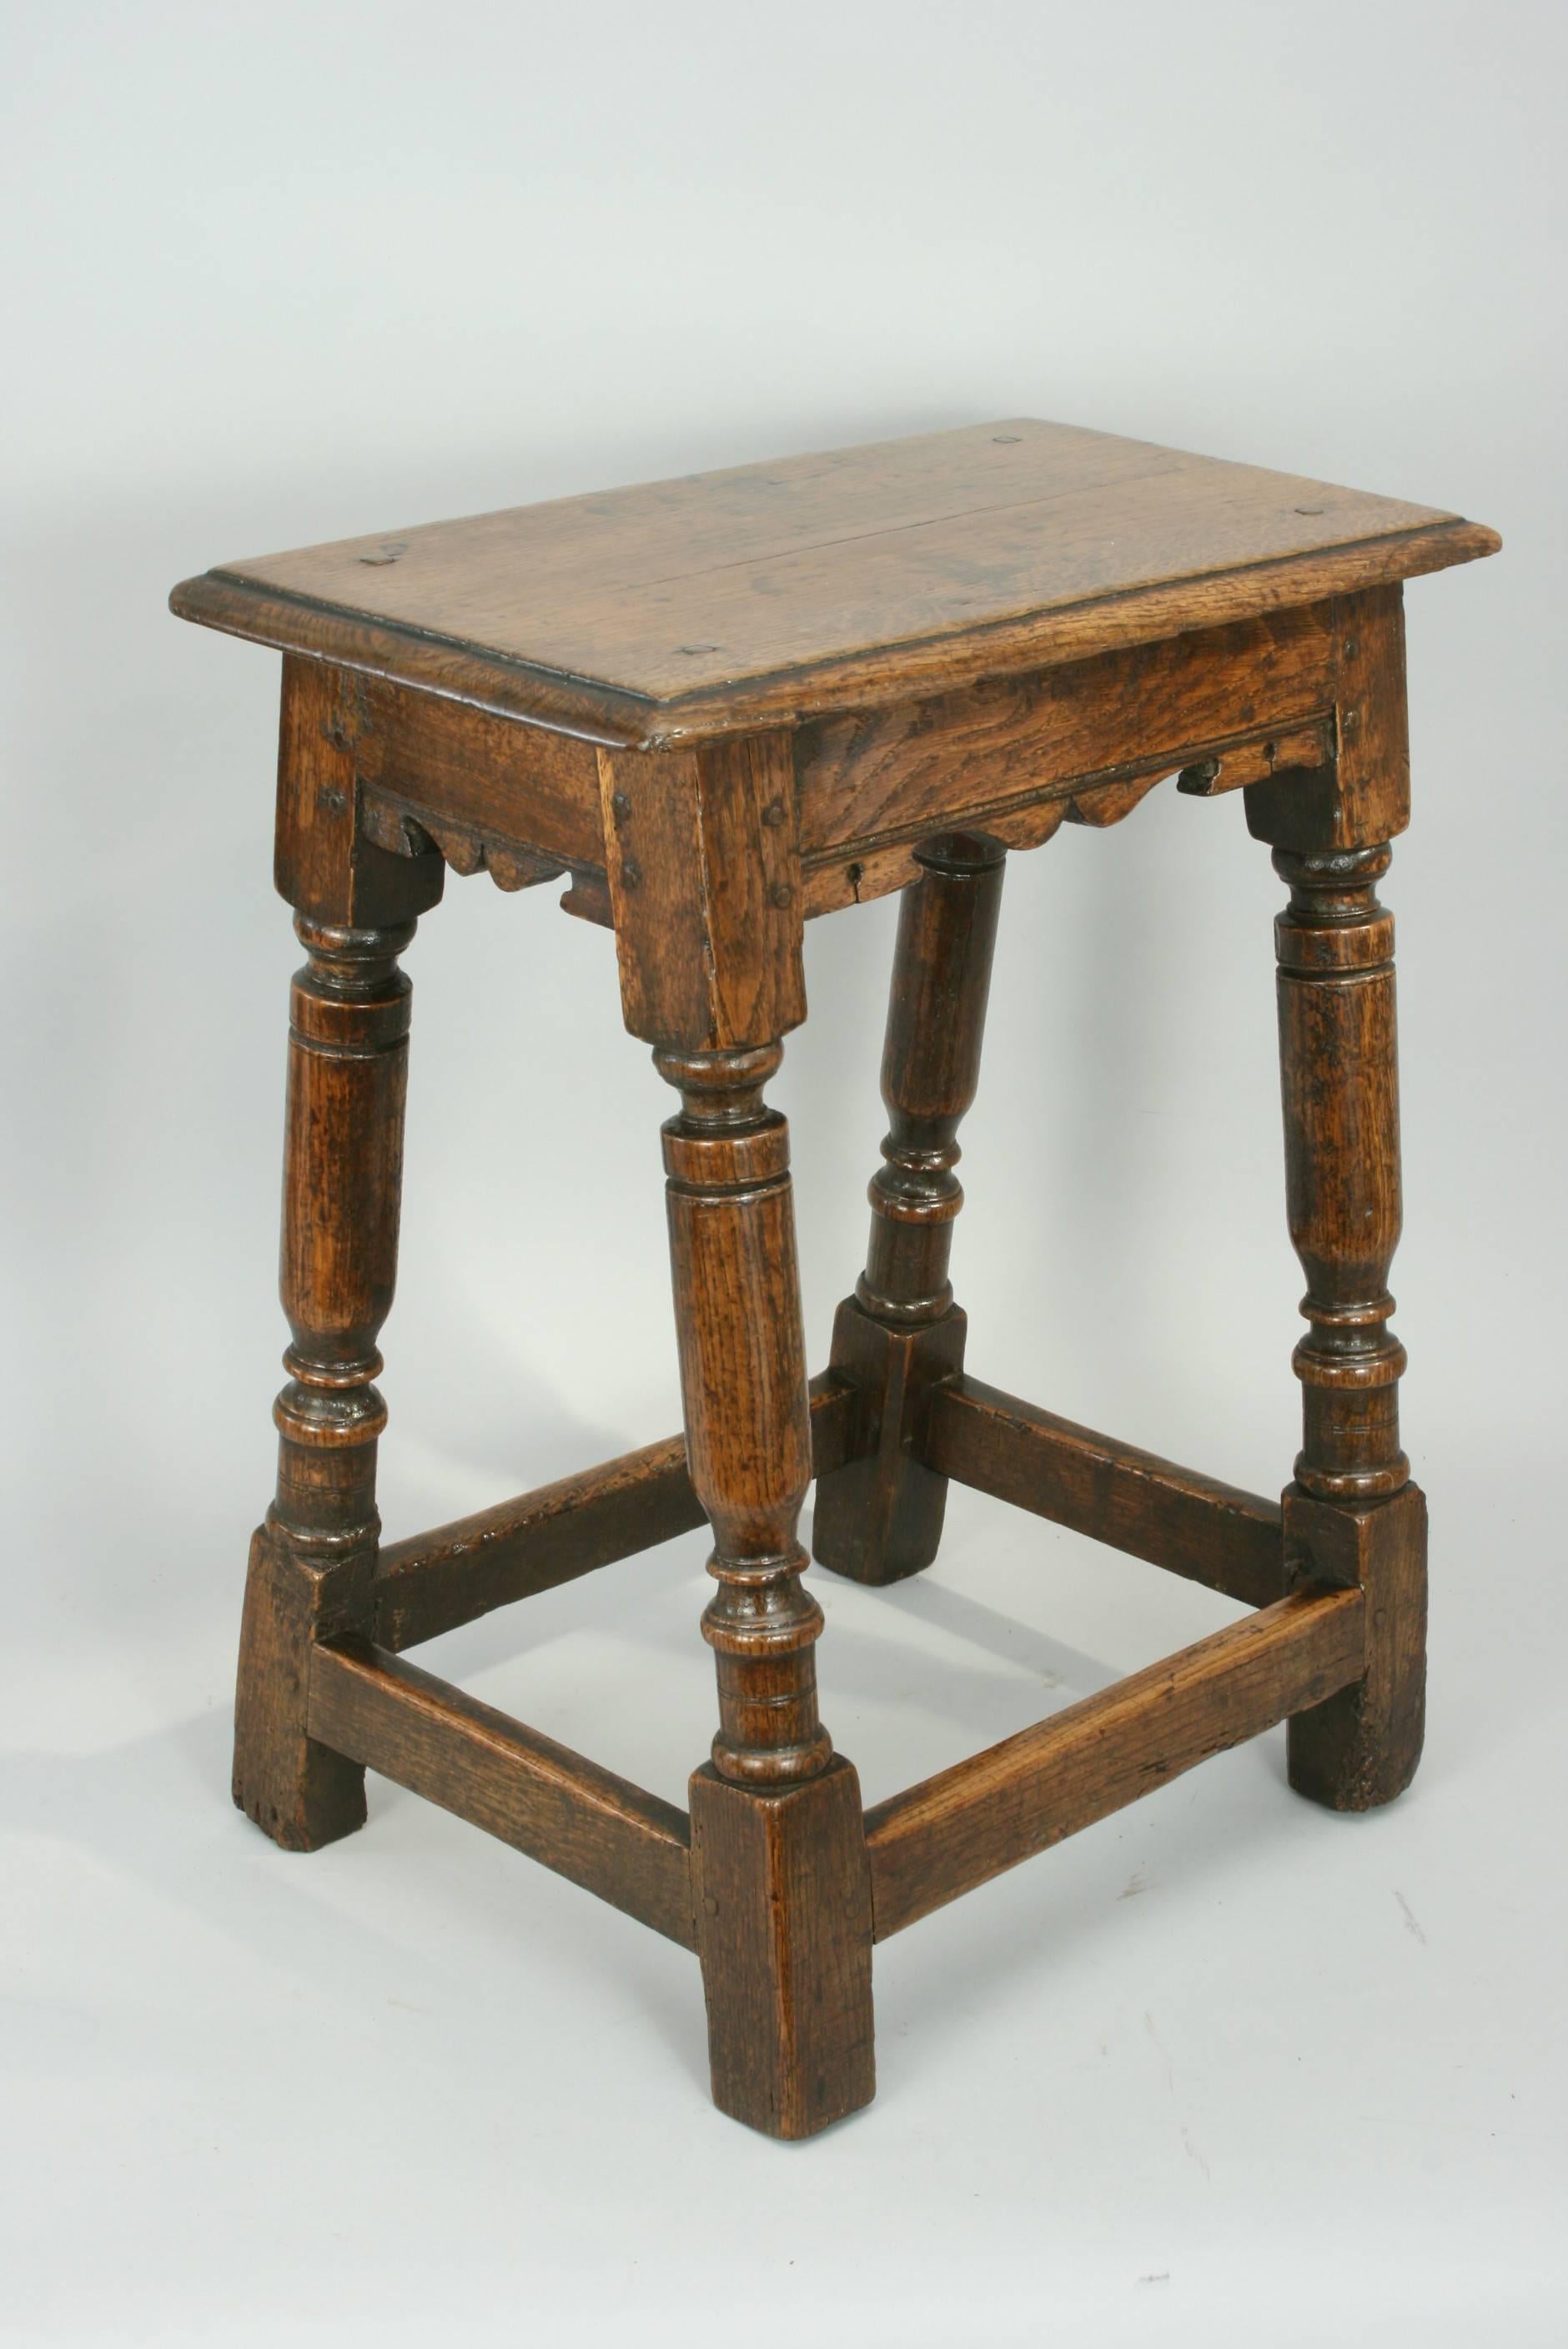 An exceptionally high quality early oak joint stool in original condition with wonderful color and patina. The moulded rectangular top is pegged onto the base, which consists of moulded and shaped top rails, attractive turned legs with square shaped